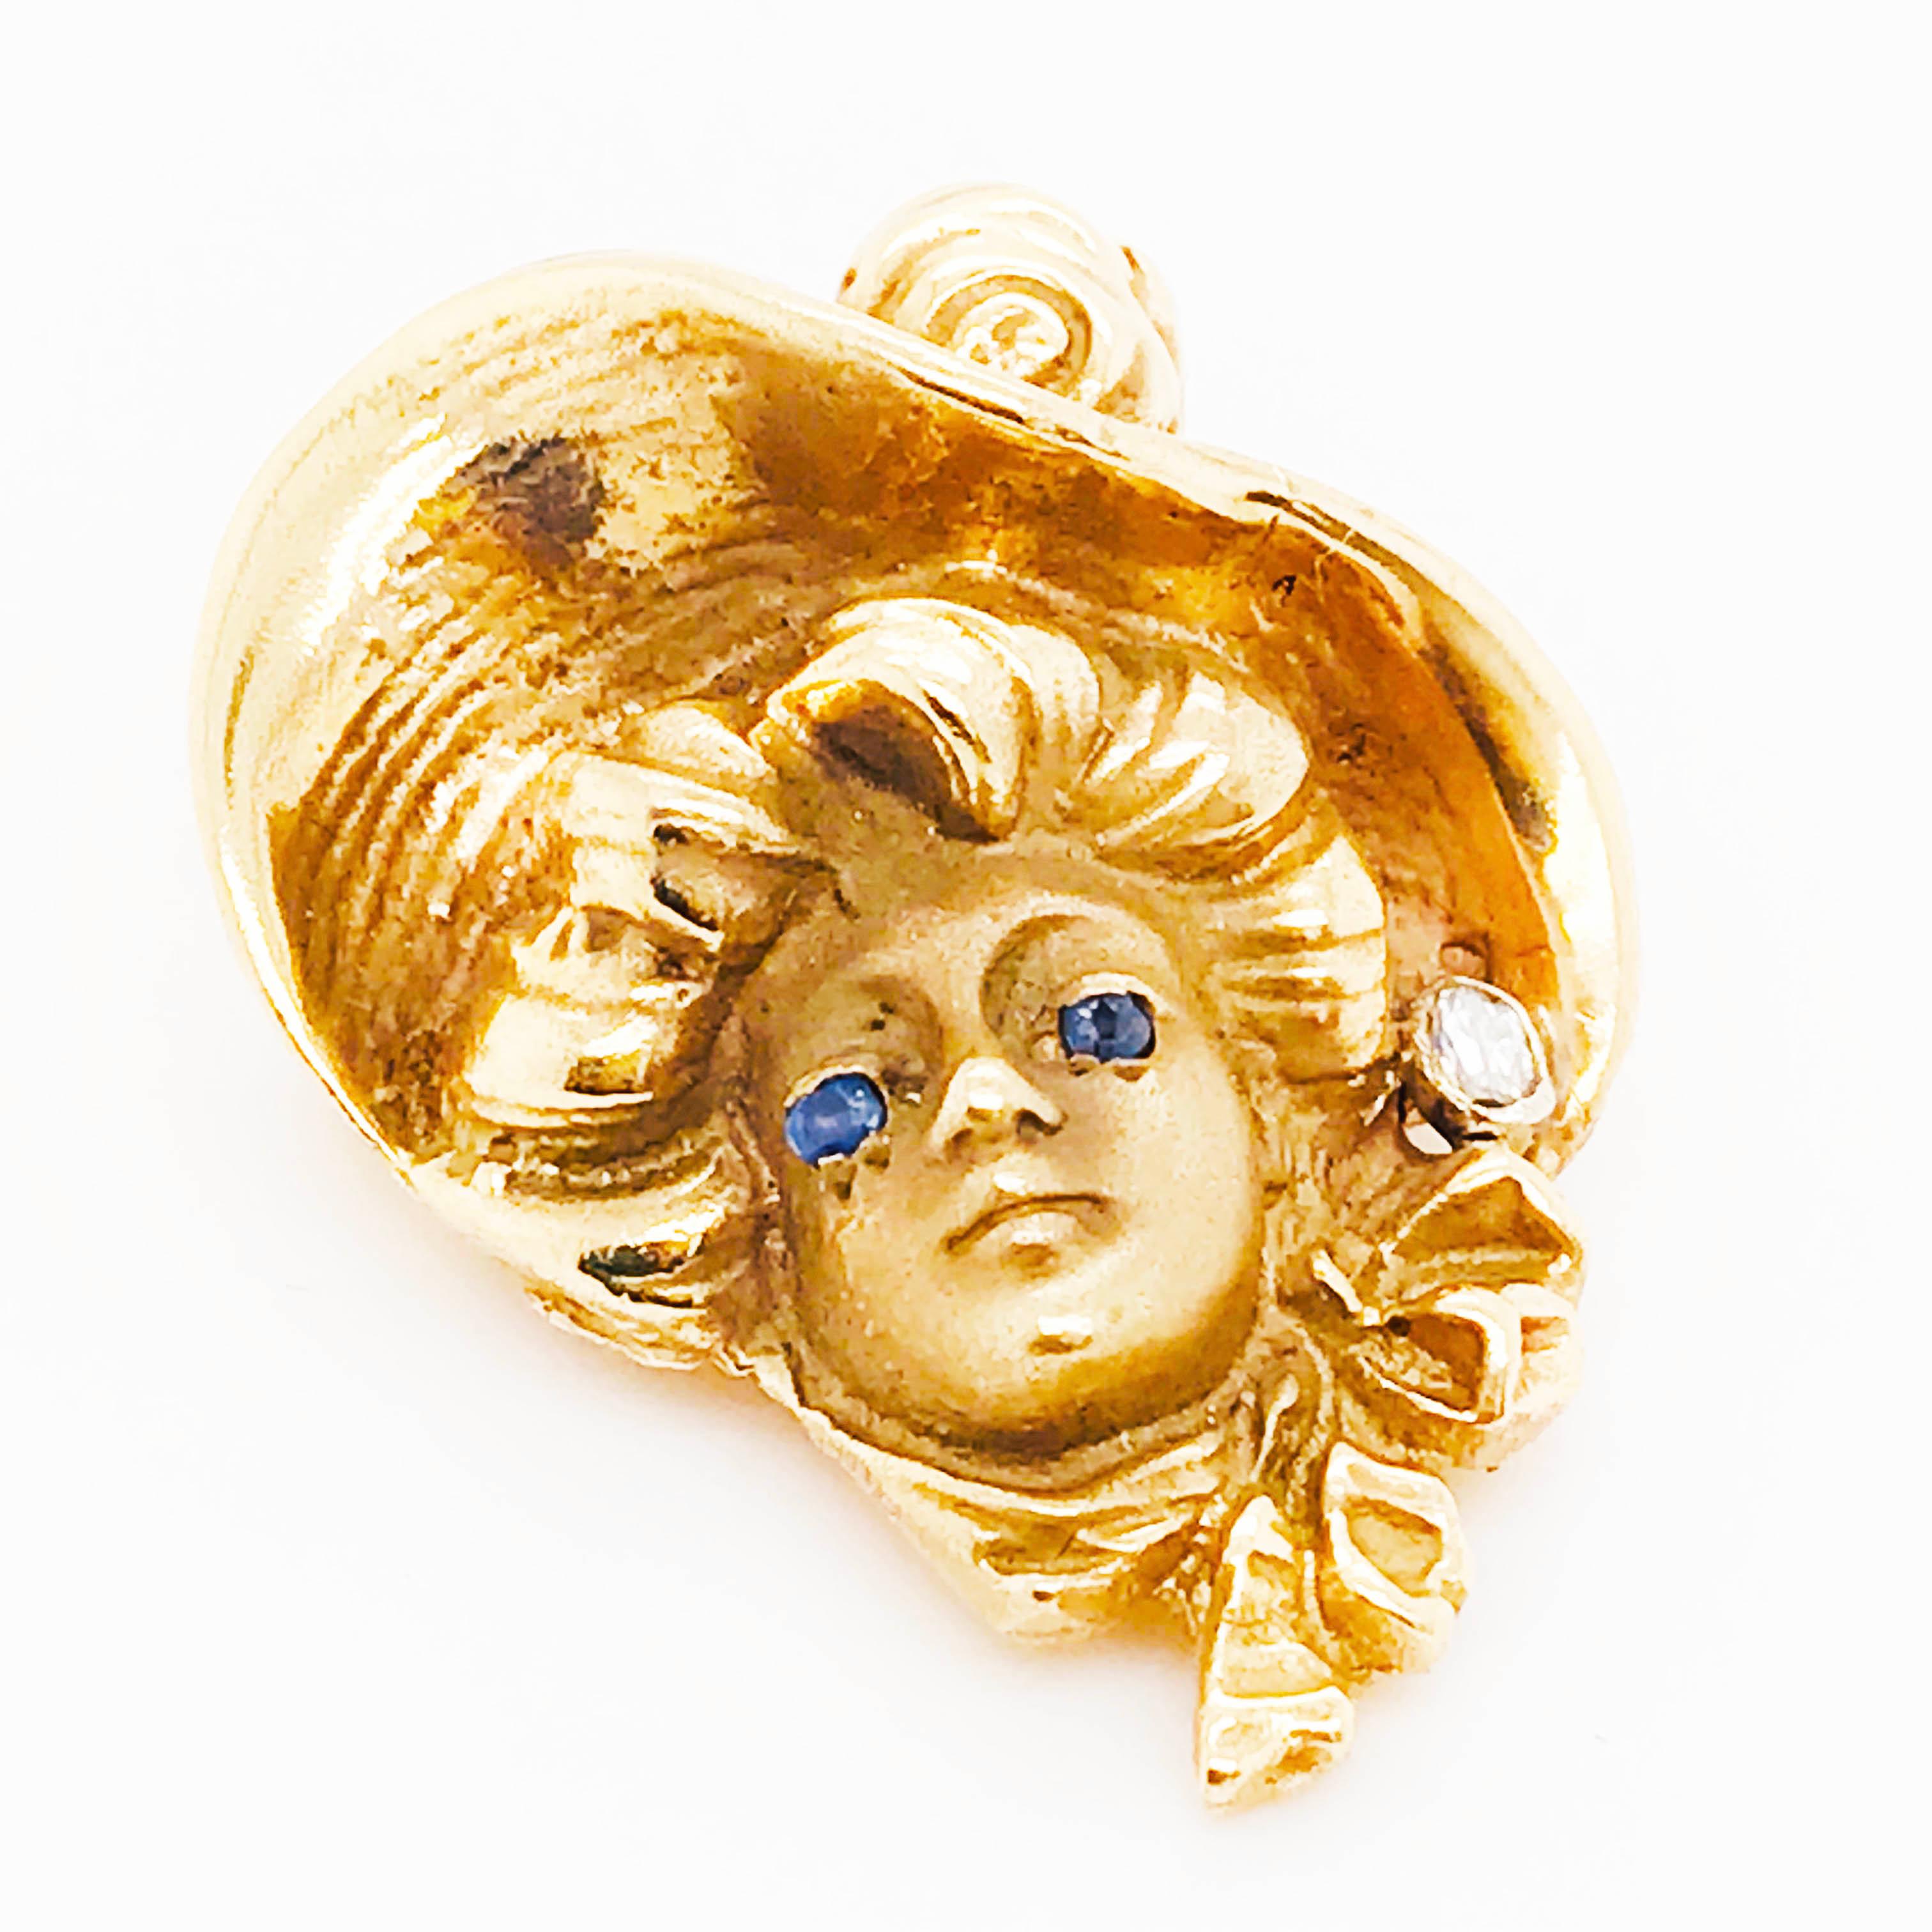 This beautiful woman brooch is a symbol of the Art Nouveau era! She has captivating round sapphire gemstones eyes set in rich yellow gold. The 3-dimensional woman figure has wispy, full, flowing hair that's romantic in design. Set in the left side